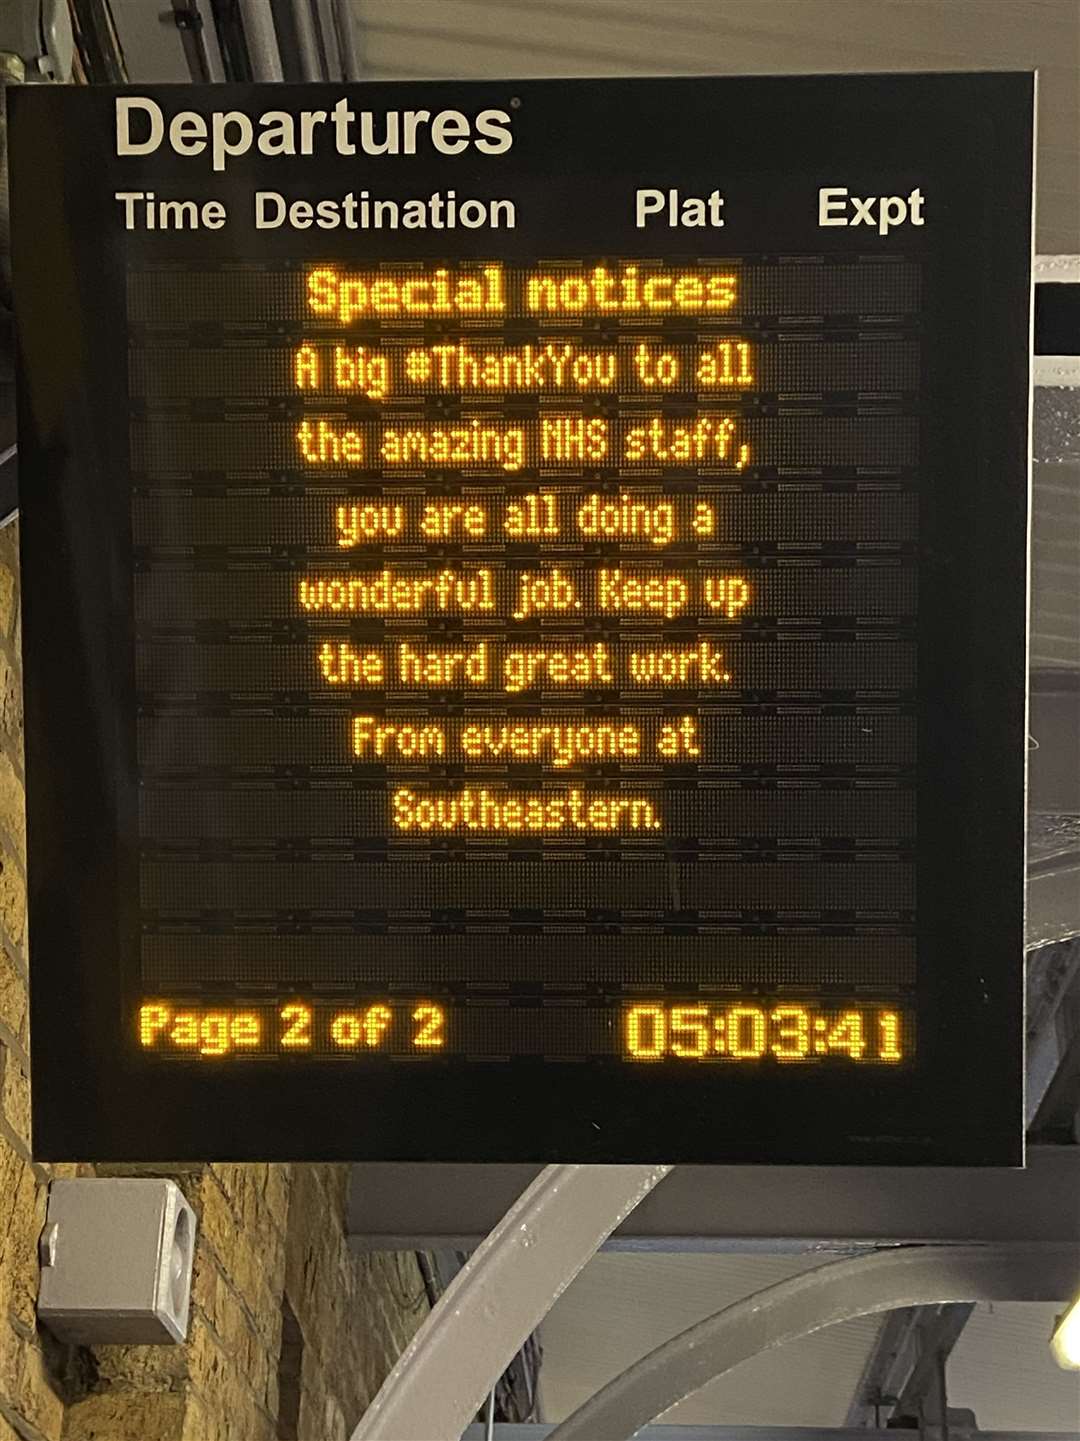 Messages, such as this one at Sandwich station, have started appaearing. Photo: Southeastern